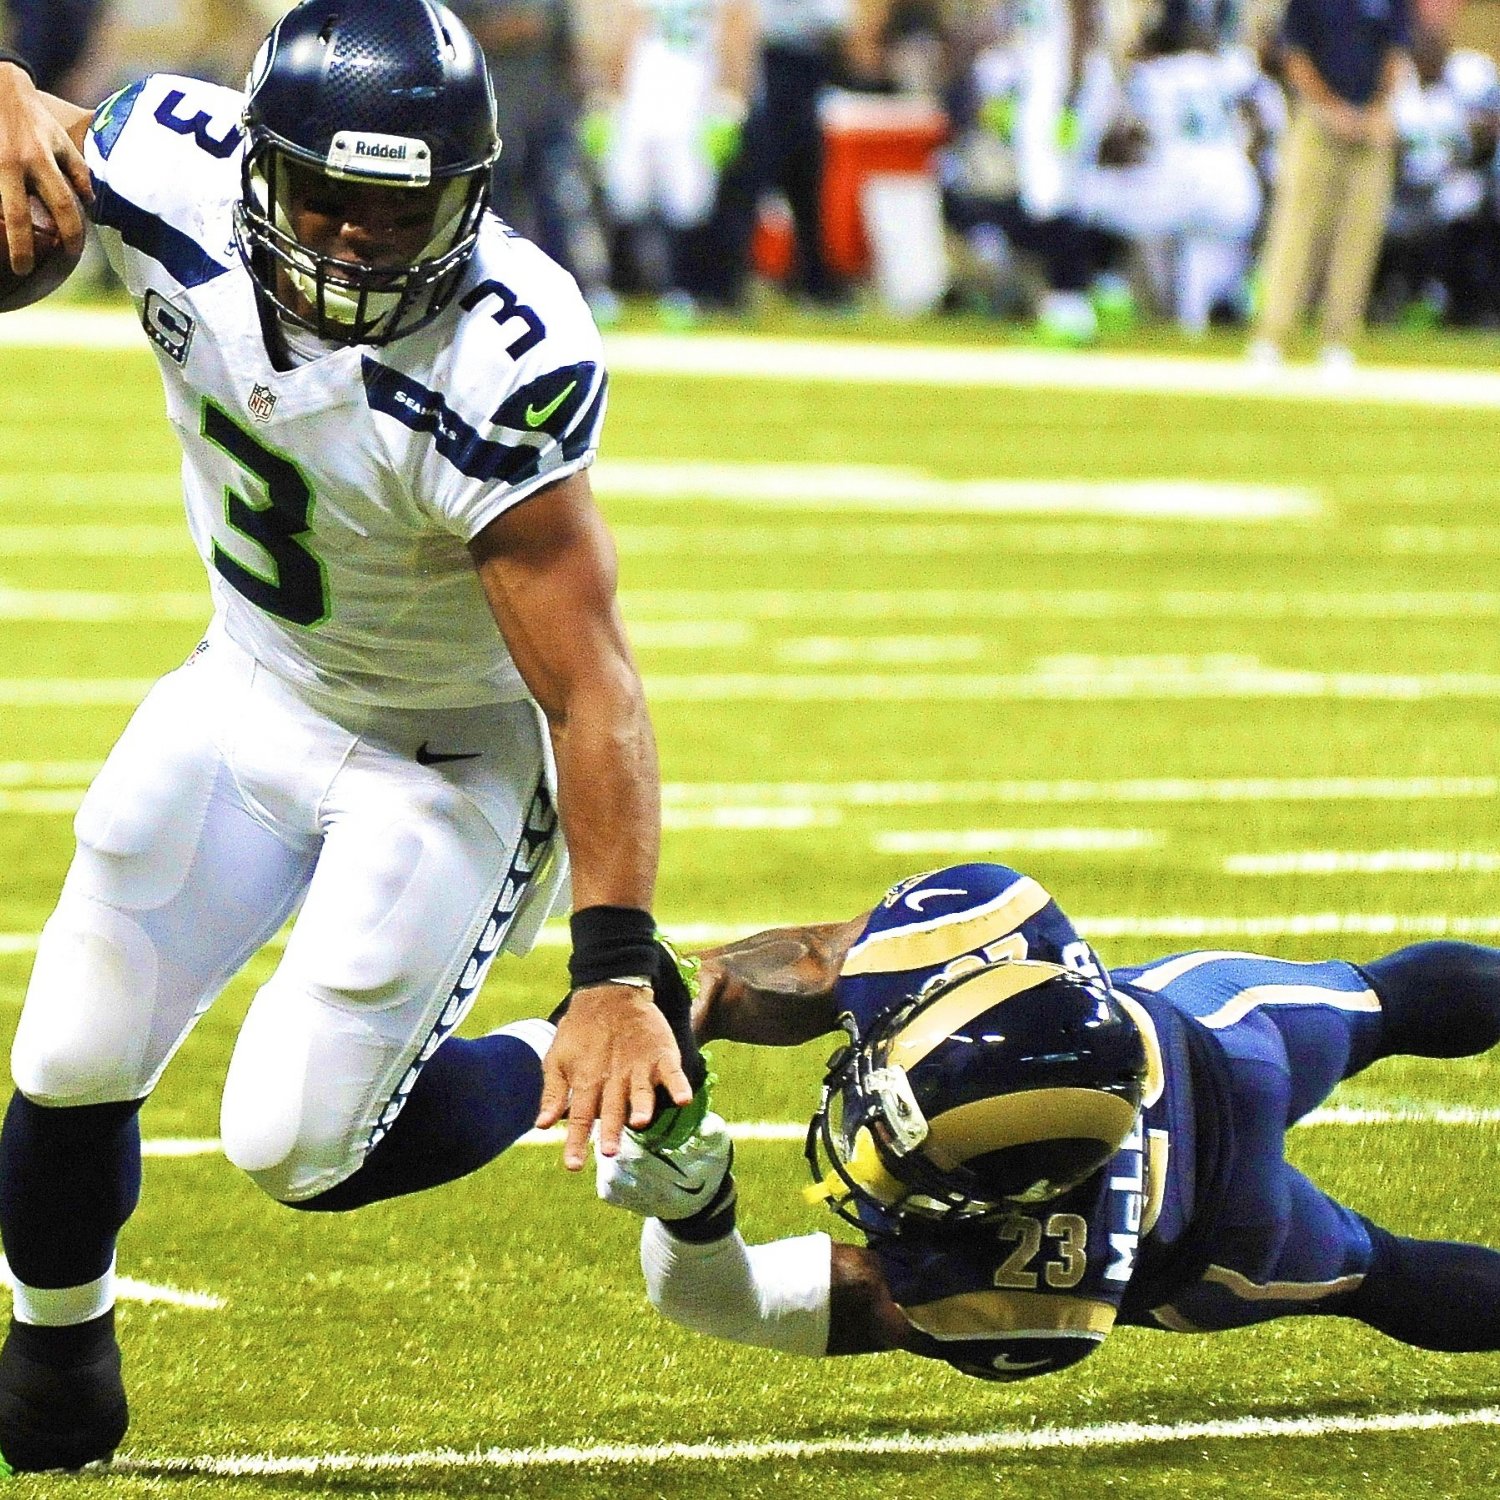 Seattle Seahawks vs. St. Louis Rams: Live Score, Highlights and 